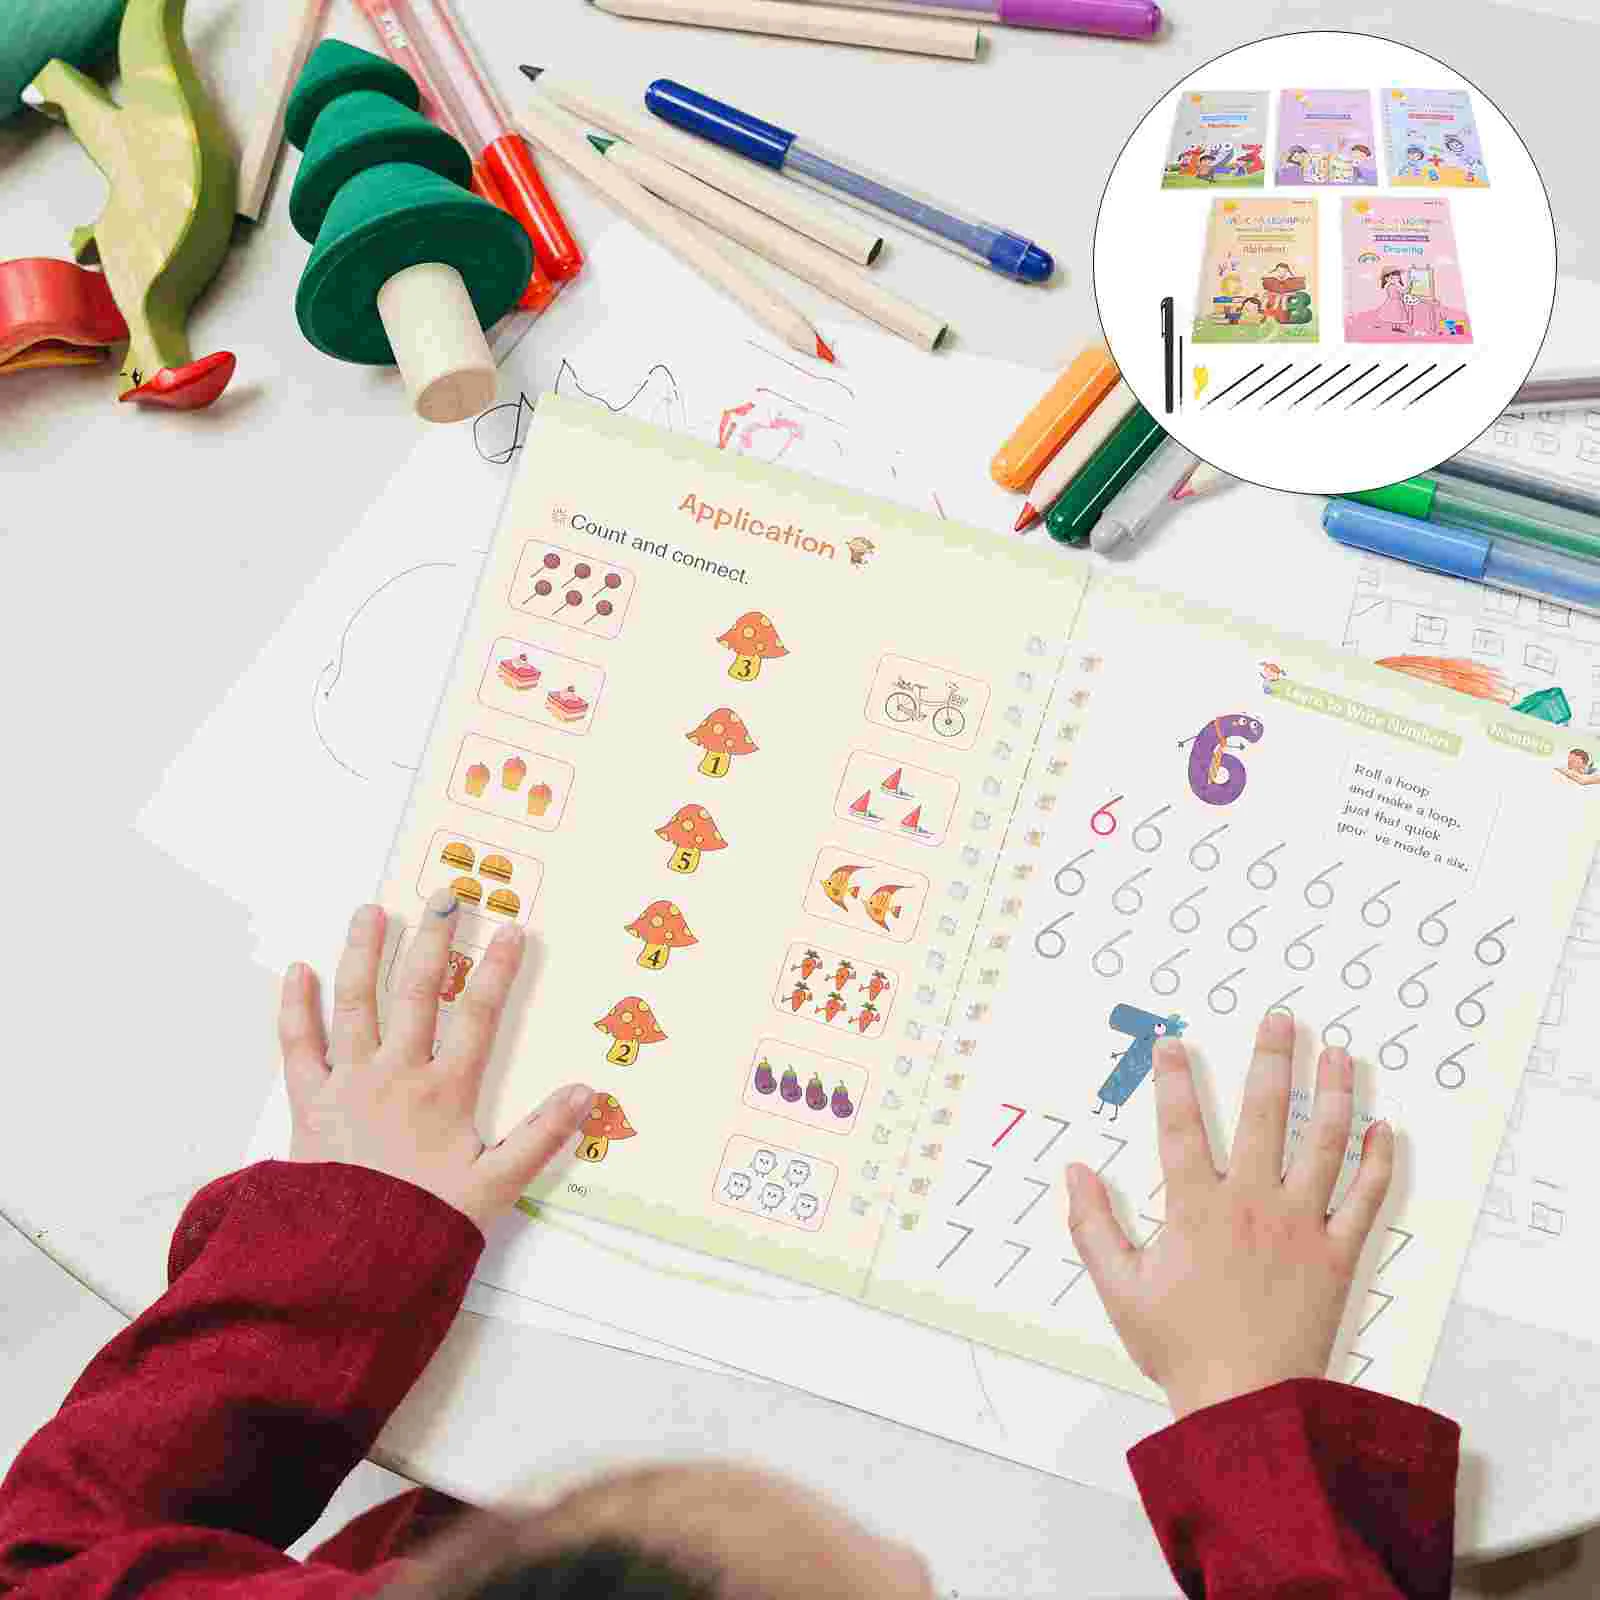 

1 Set Children Practice Books Writing Training Copybooks Practice Book with Pen and Refills